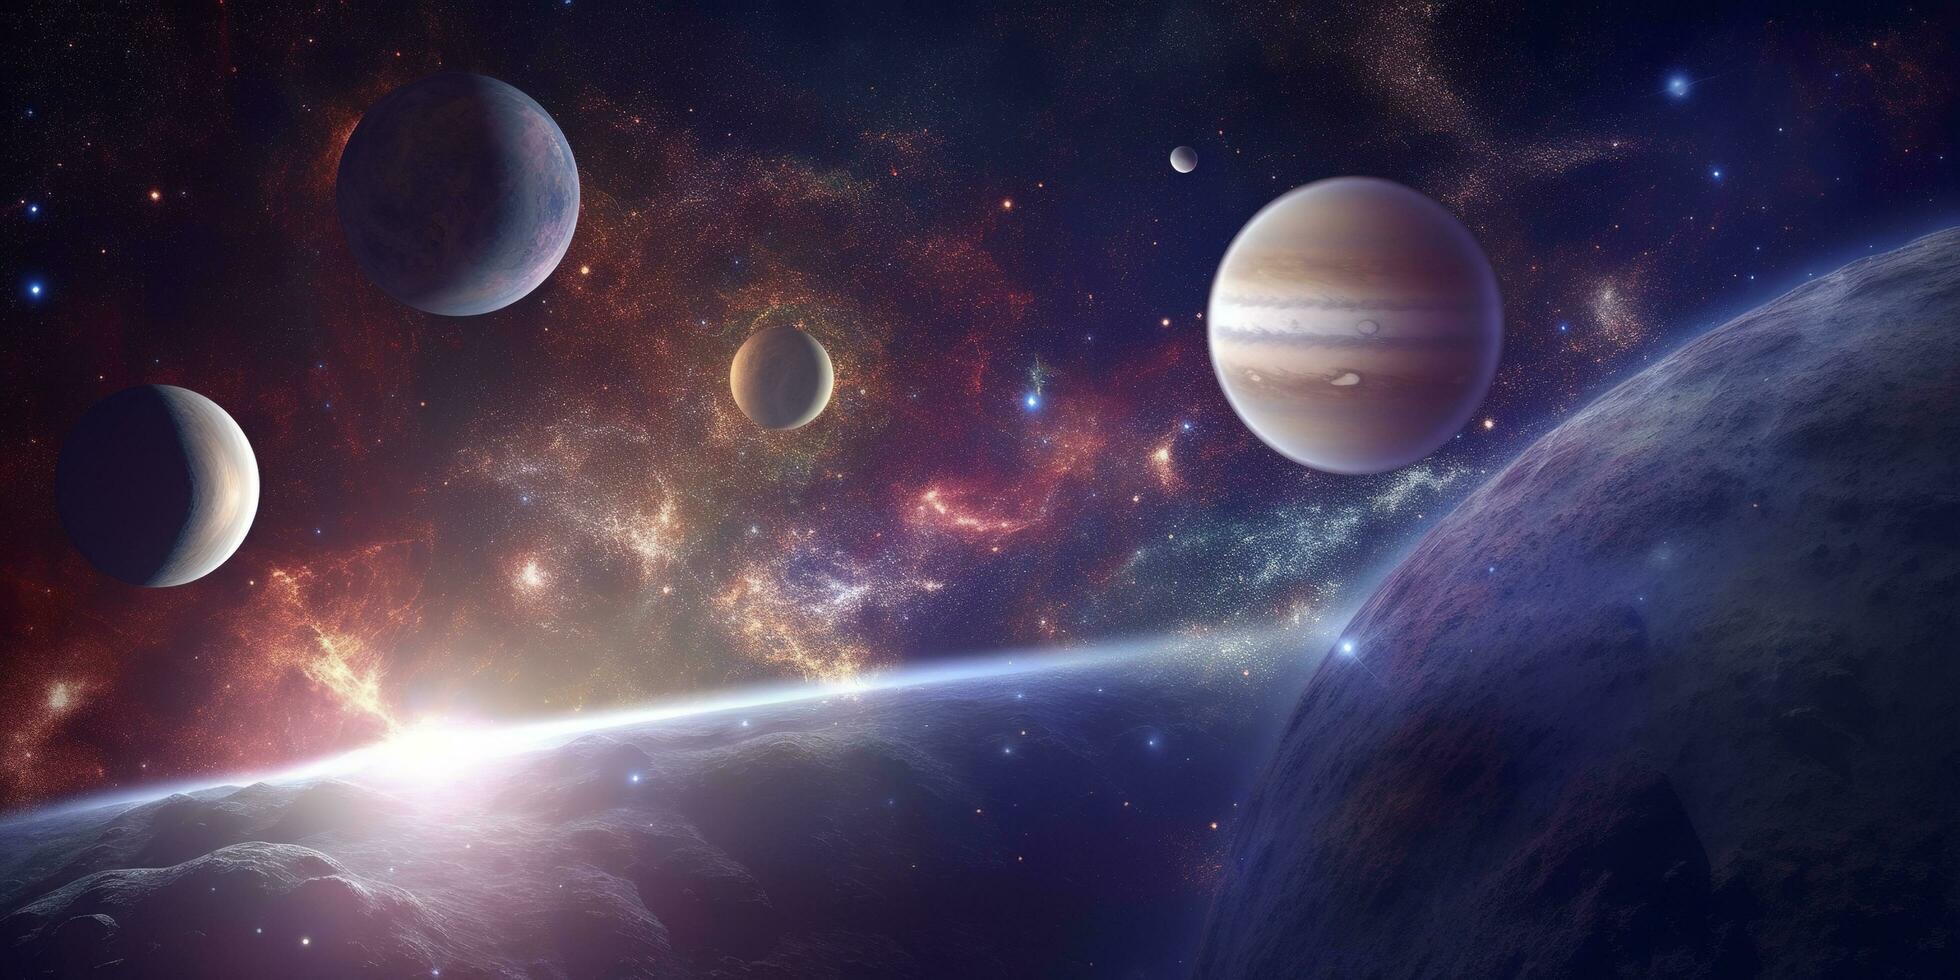 Space wallpaper banner background. Stunning view of a cosmic galaxy with planets and space objects. Elements of this image furnished by NASA, generate ai photo